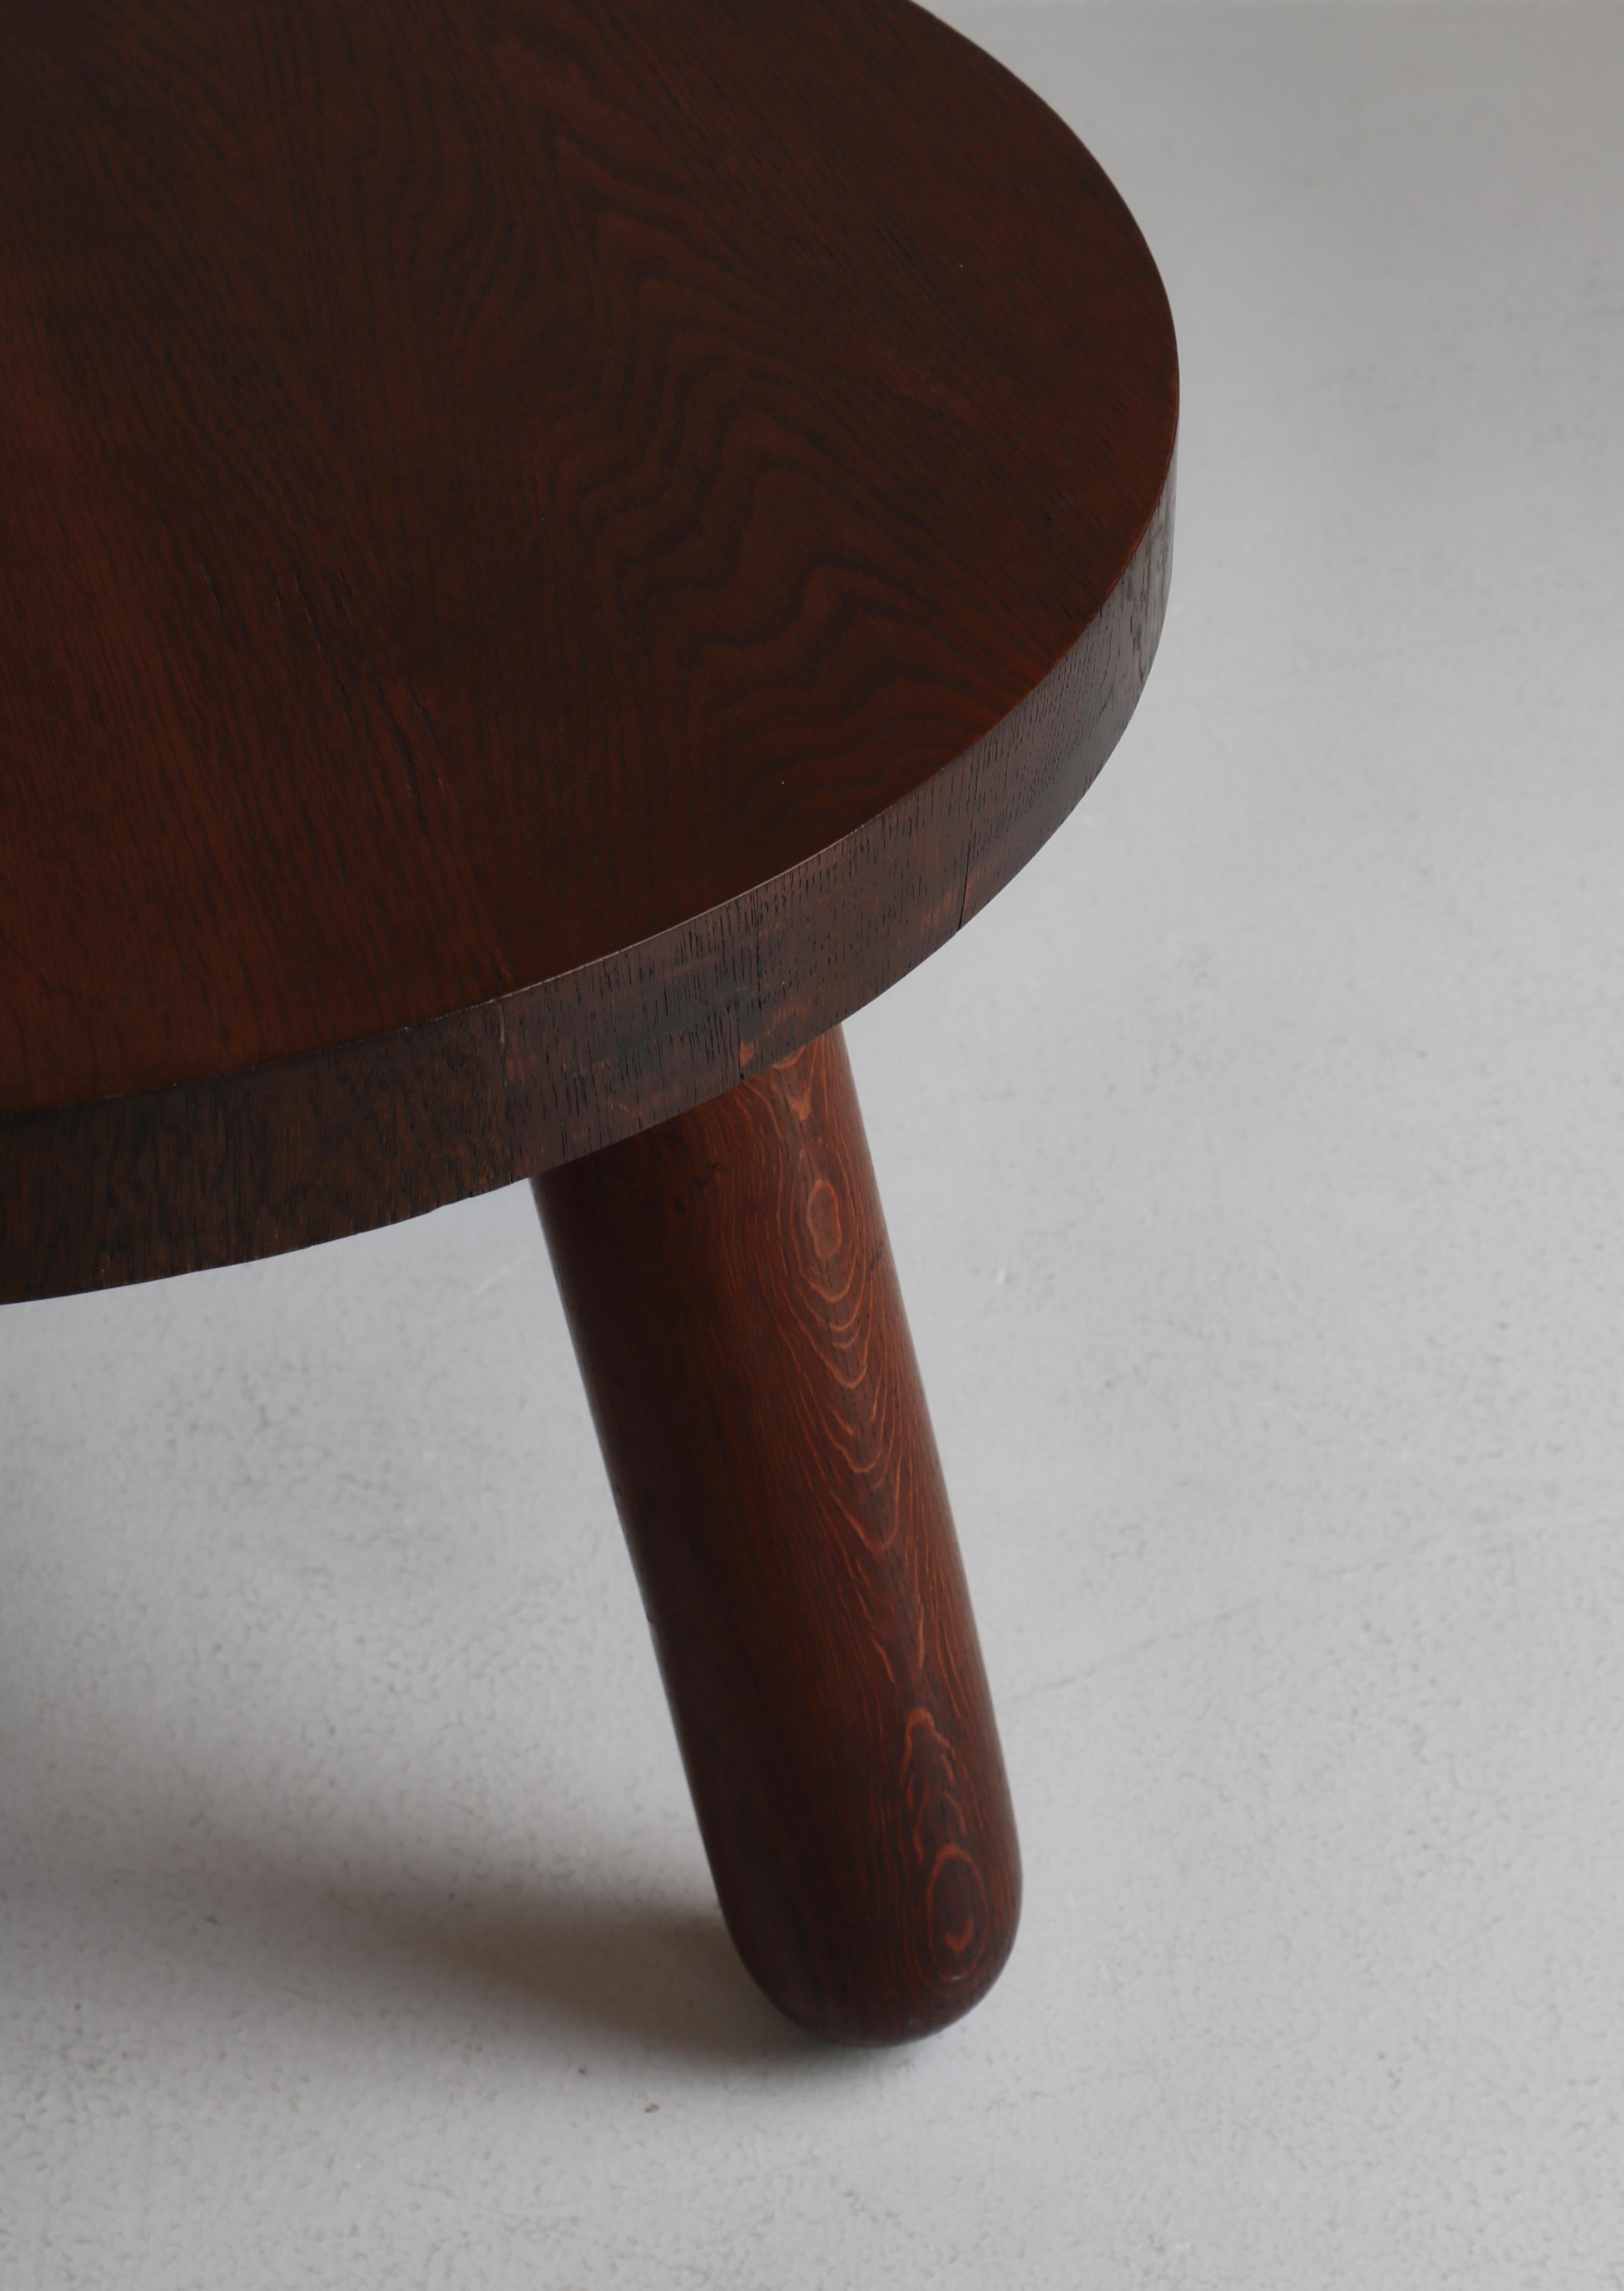 Chunky Danish Modern Side Table in Stained Oak by Otto Færge, Denmark, 1940s For Sale 5